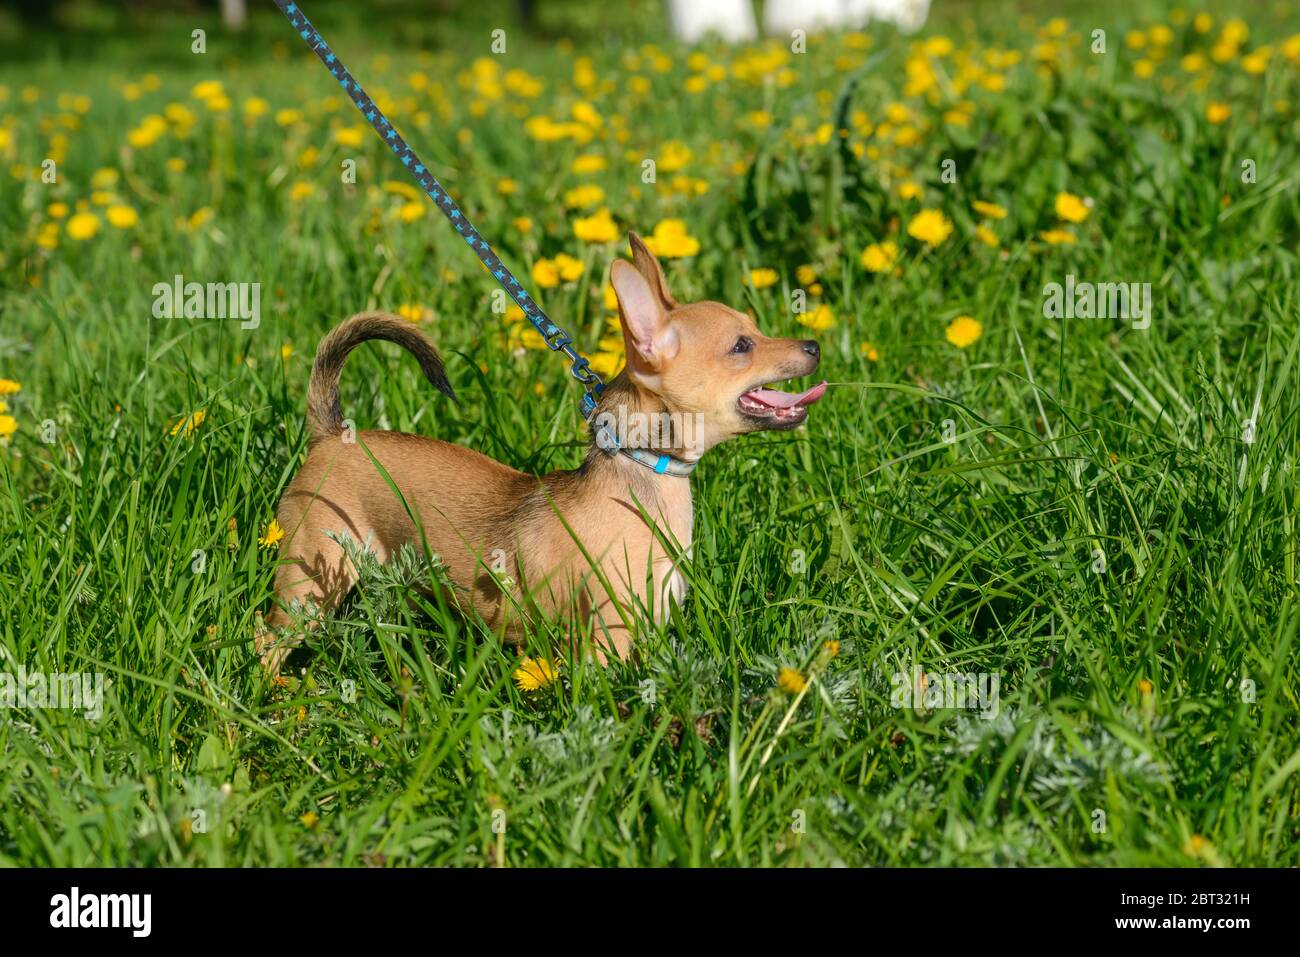 Puppy Chihuahua with a blue leash standing among dandelions. Man walks a dog. Beautiful funny young red brown Chihuahua dog. Dog in the grass Stock Photo